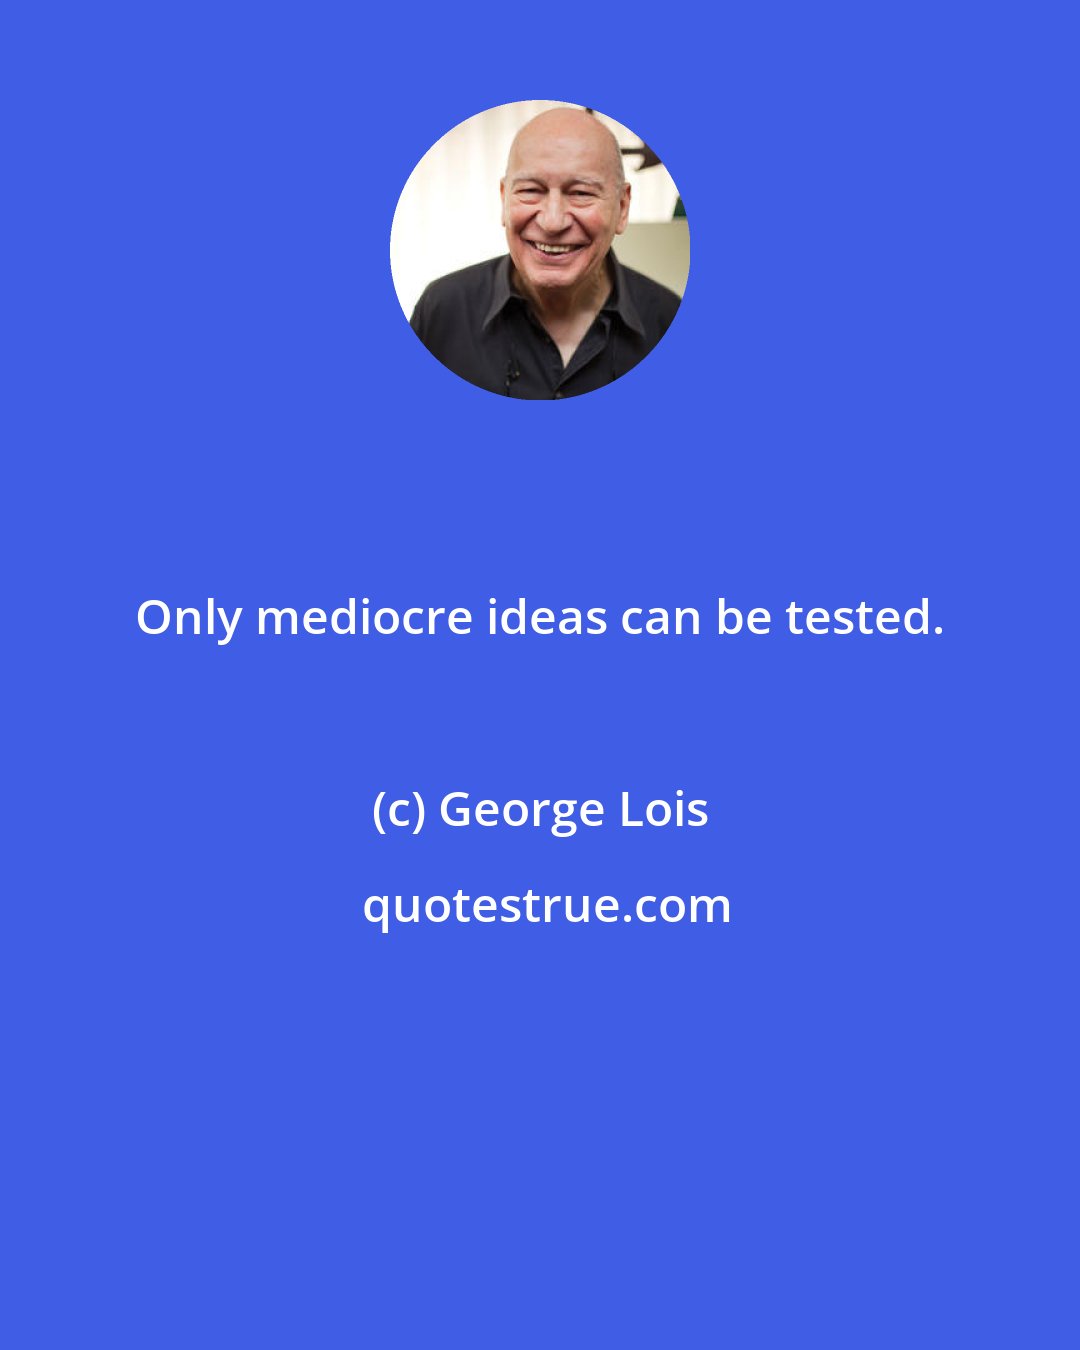 George Lois: Only mediocre ideas can be tested.